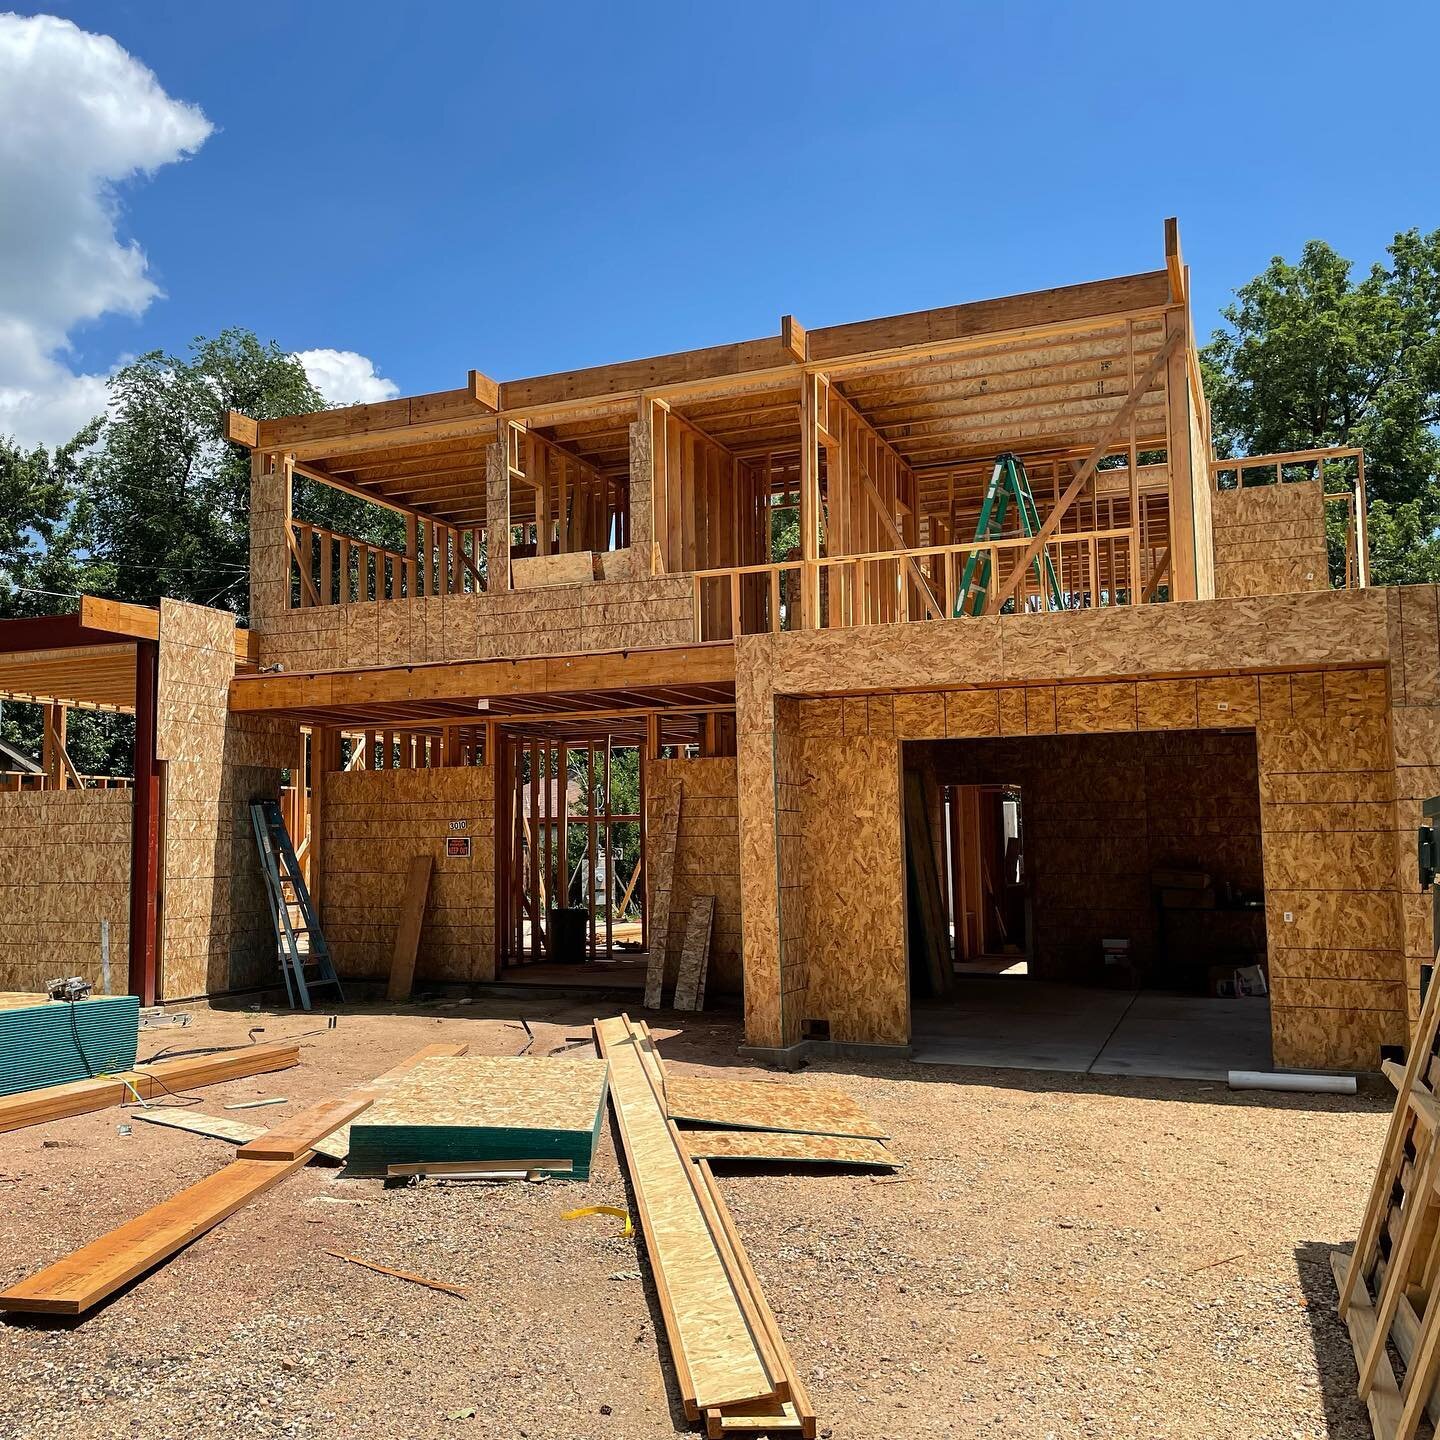 Great framing progress on our new house project in North Boulder. Jesse and his team are making it happen. .
.
.
.
#designbuild #colorado #residentialdesign #architecturedaily #archilovers #archdaily
#dwell #thinkingarchitecture #residentialarchitect